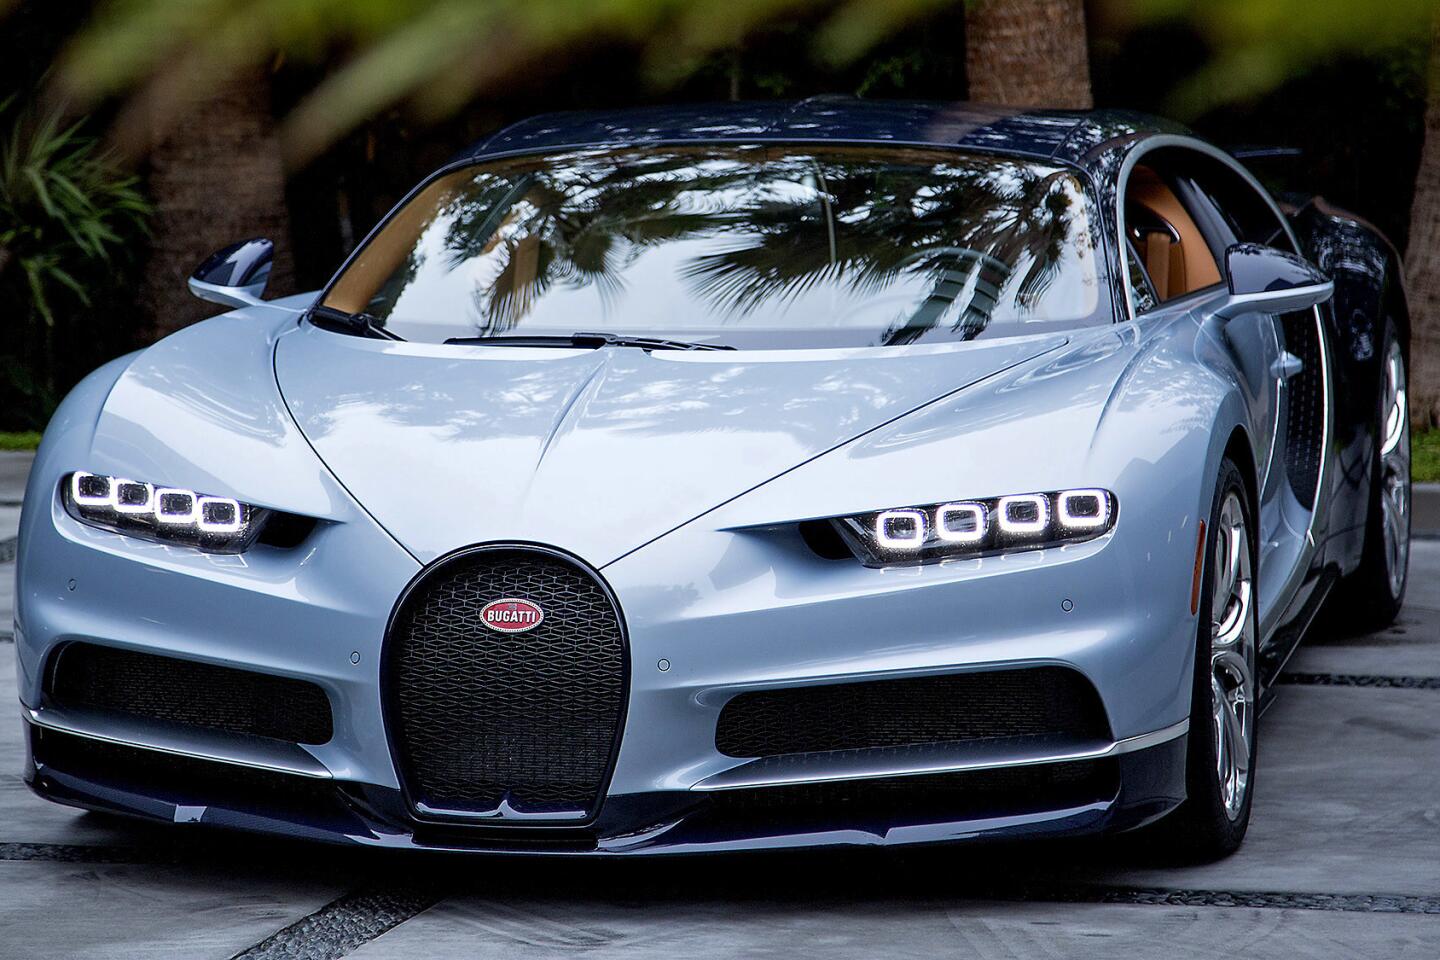 $19 million Bugatti is the most expensive car ever sold